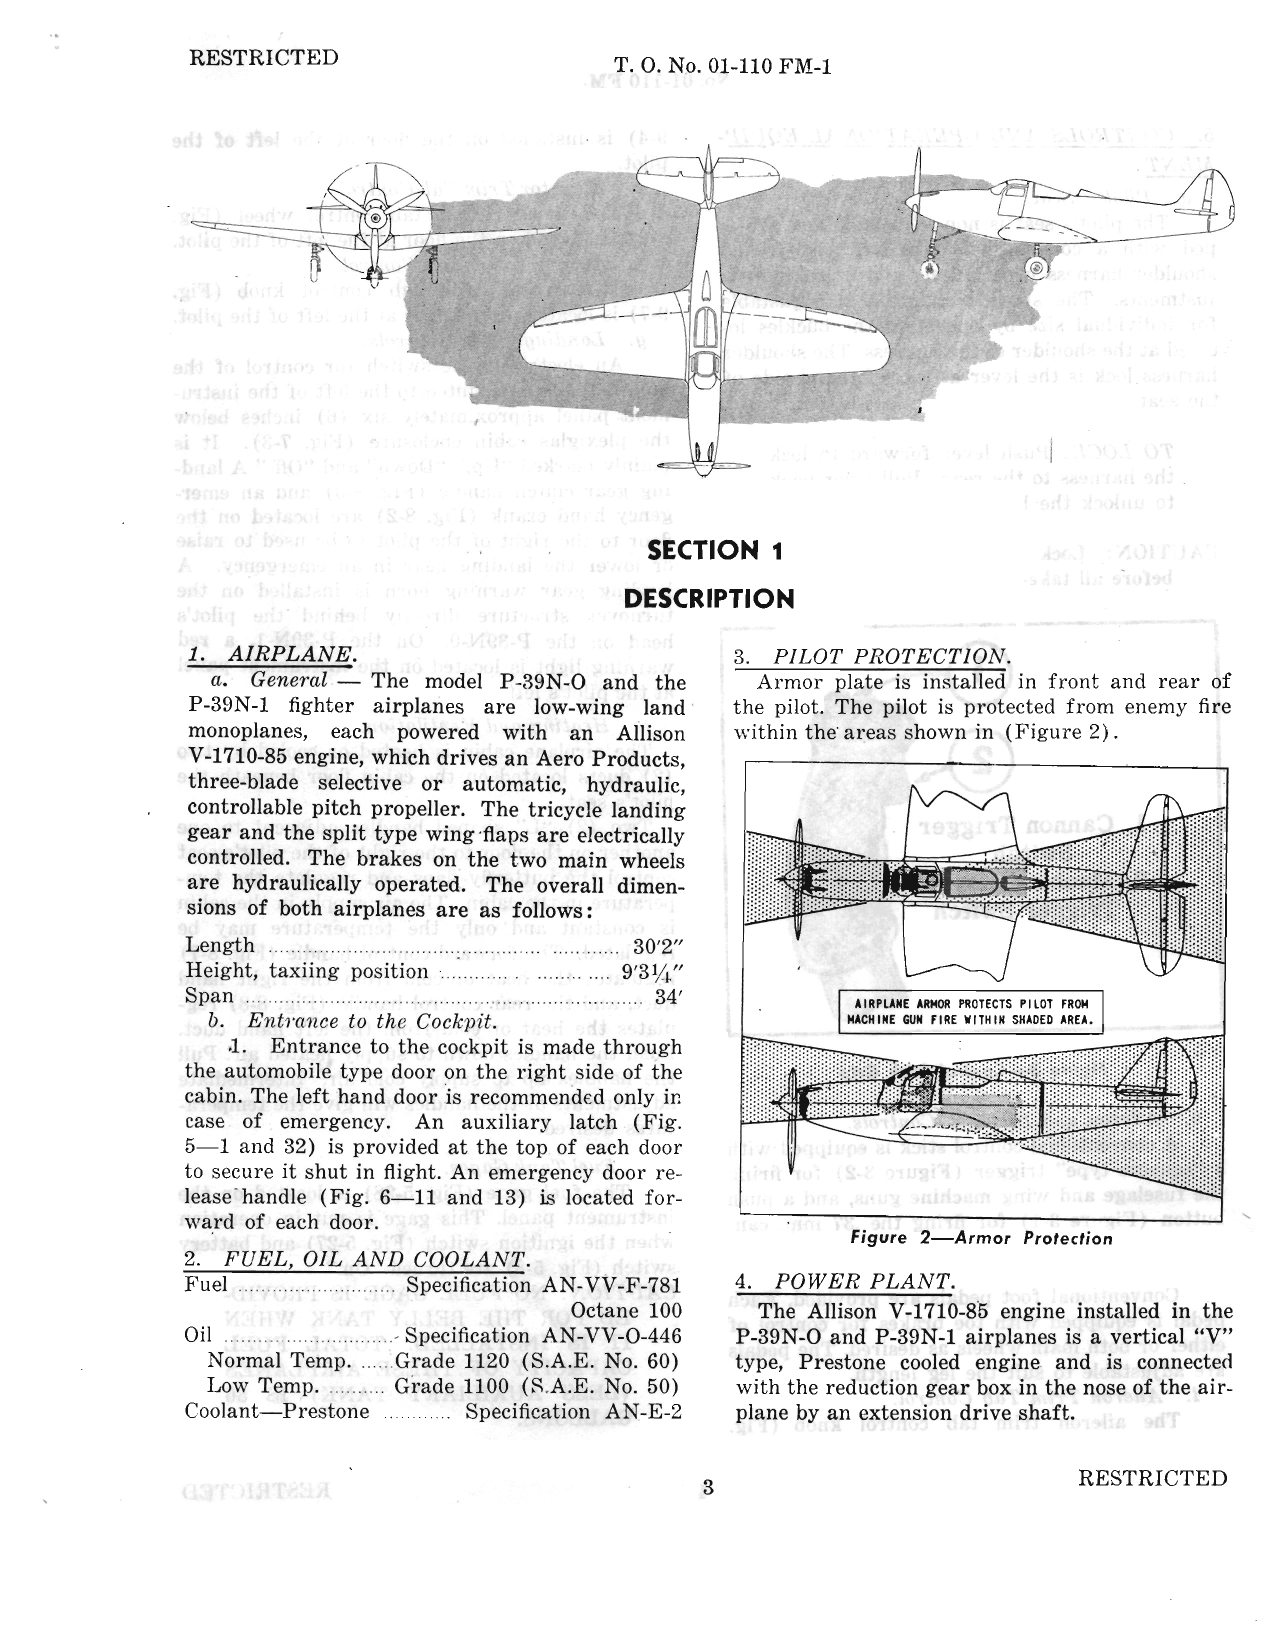 Sample page 5 from AirCorps Library document: Pilot's Flight Operating Instructions for P-39N-O and P-39N-1